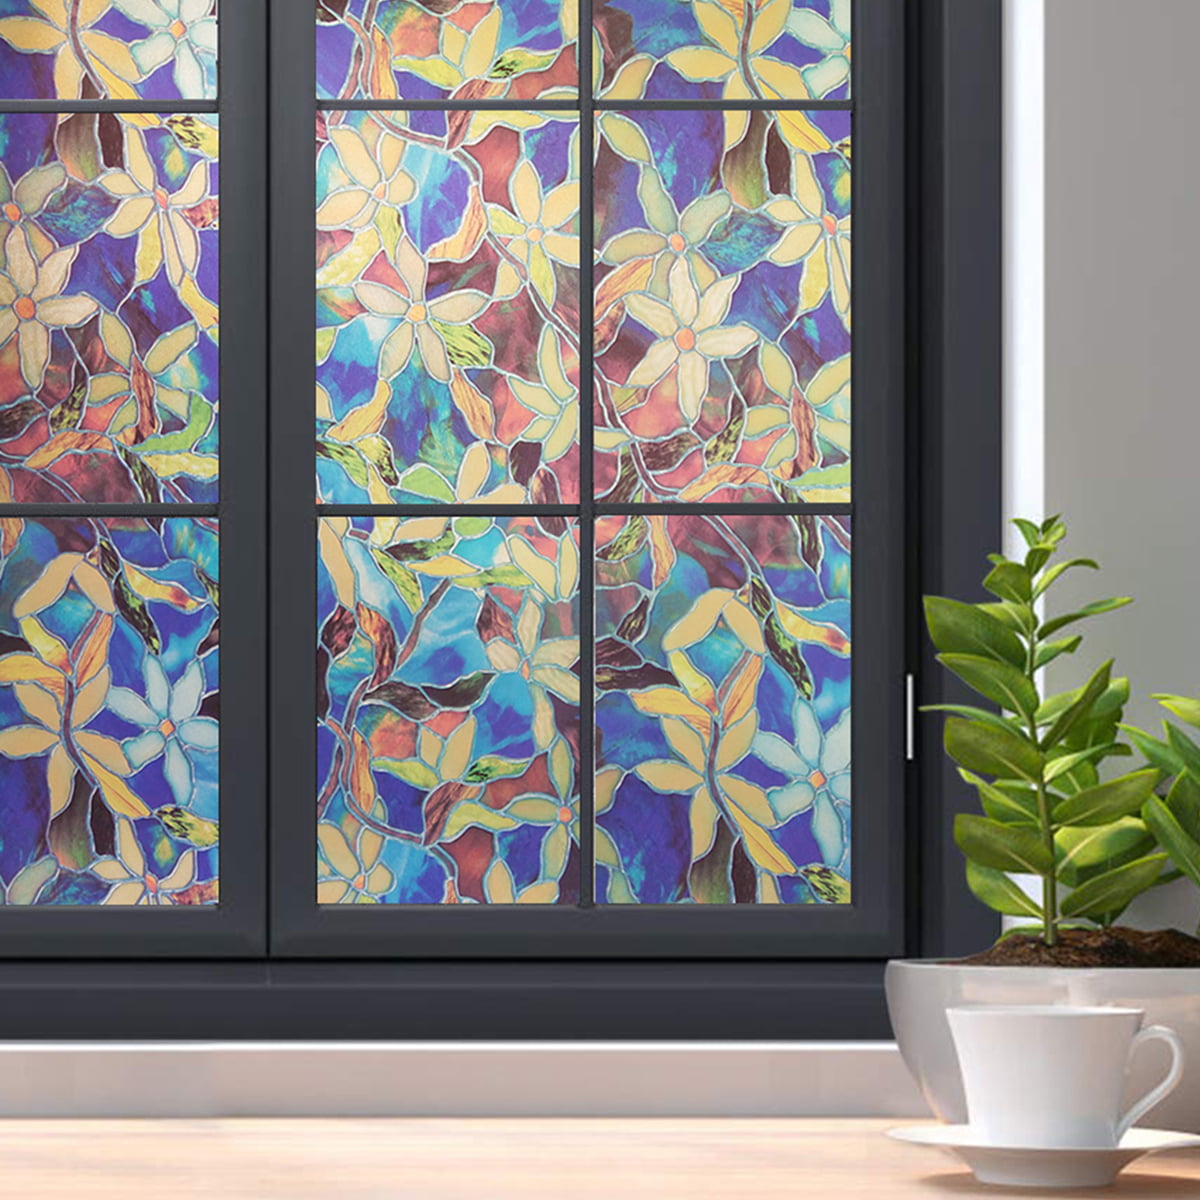 Pvc Privacy Window Decorative Films Orchid Stained Glass Stickers Home Diy Decor